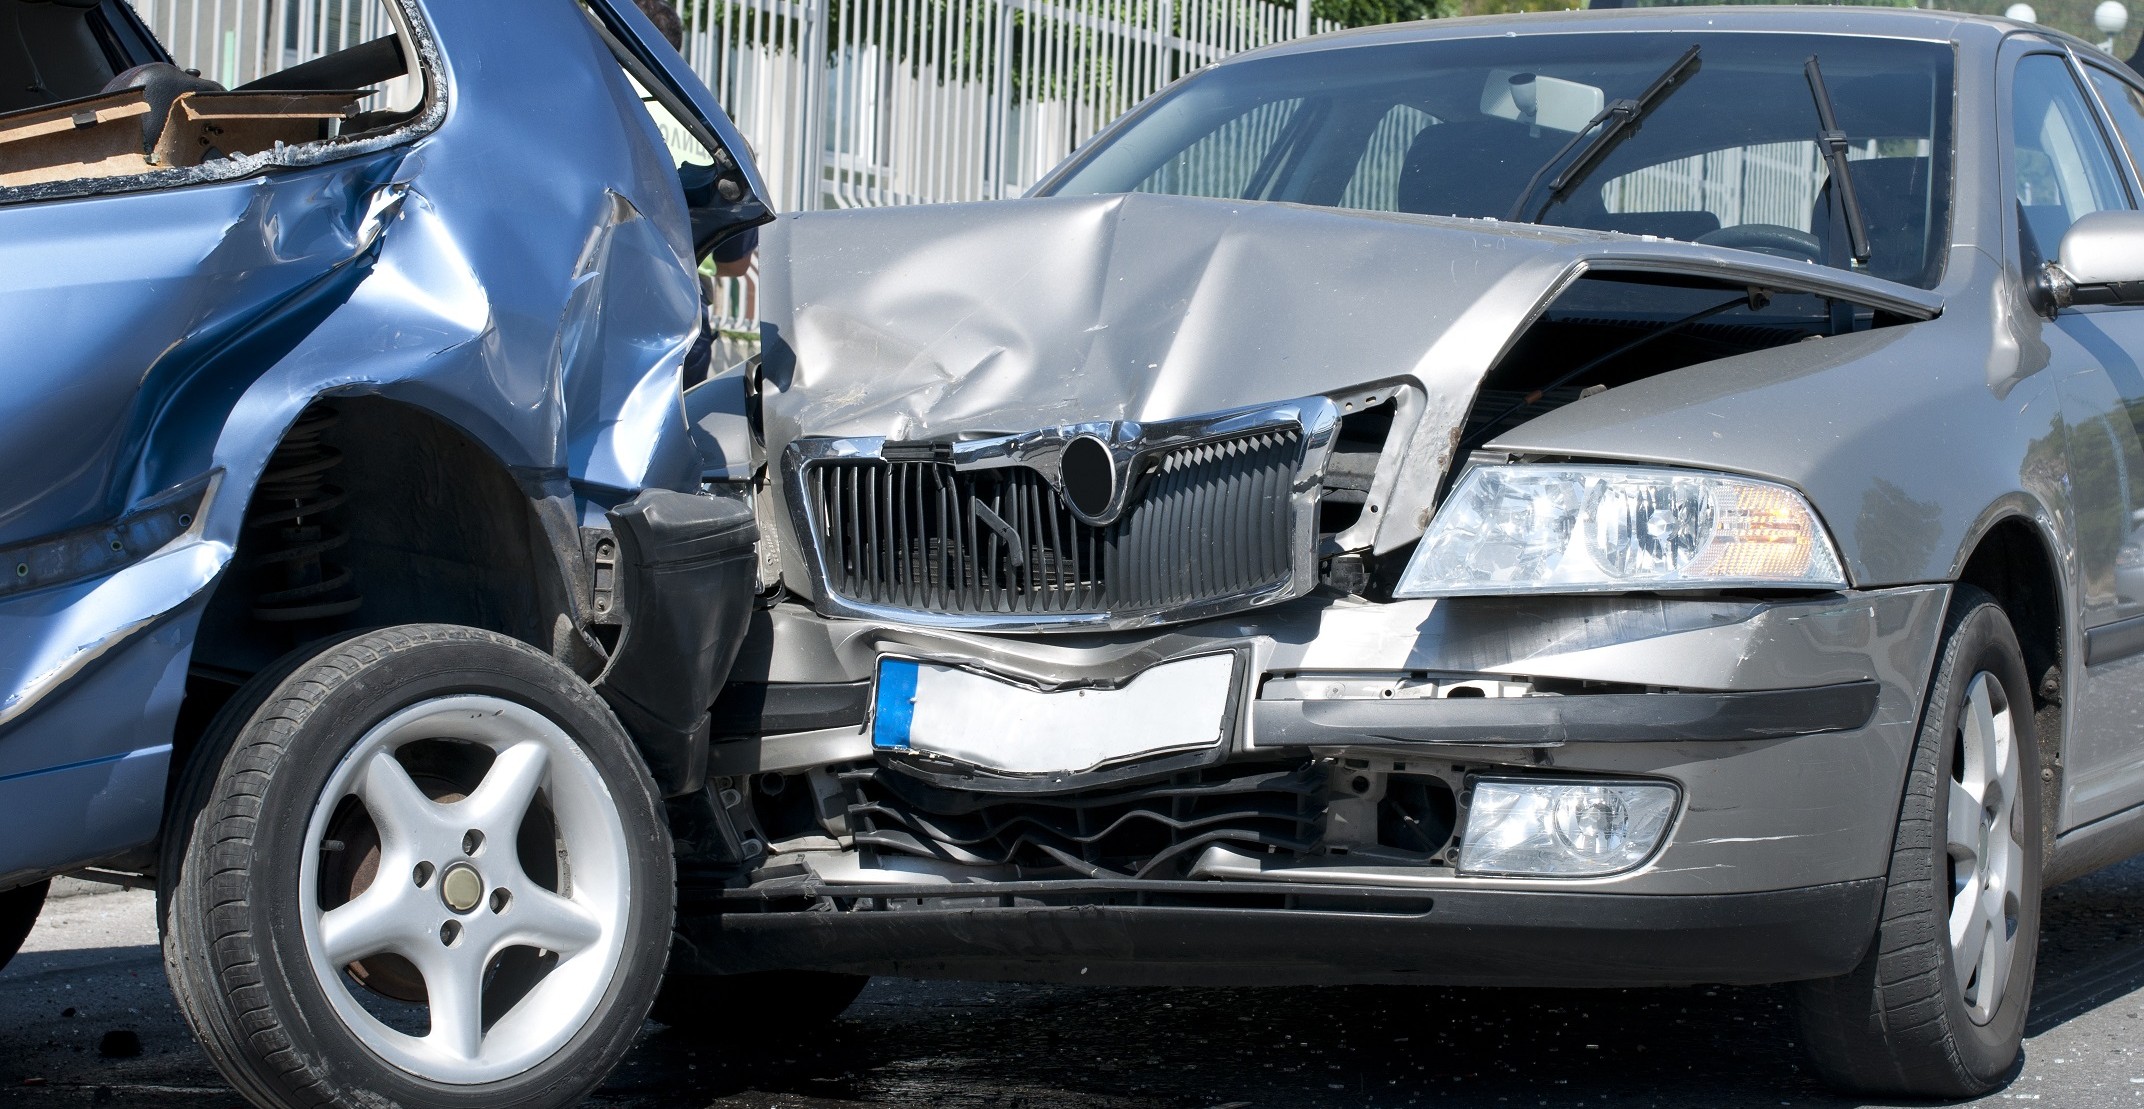 5 Main Signs You Should Hire a Car Accident Lawyer - The European Business  Review